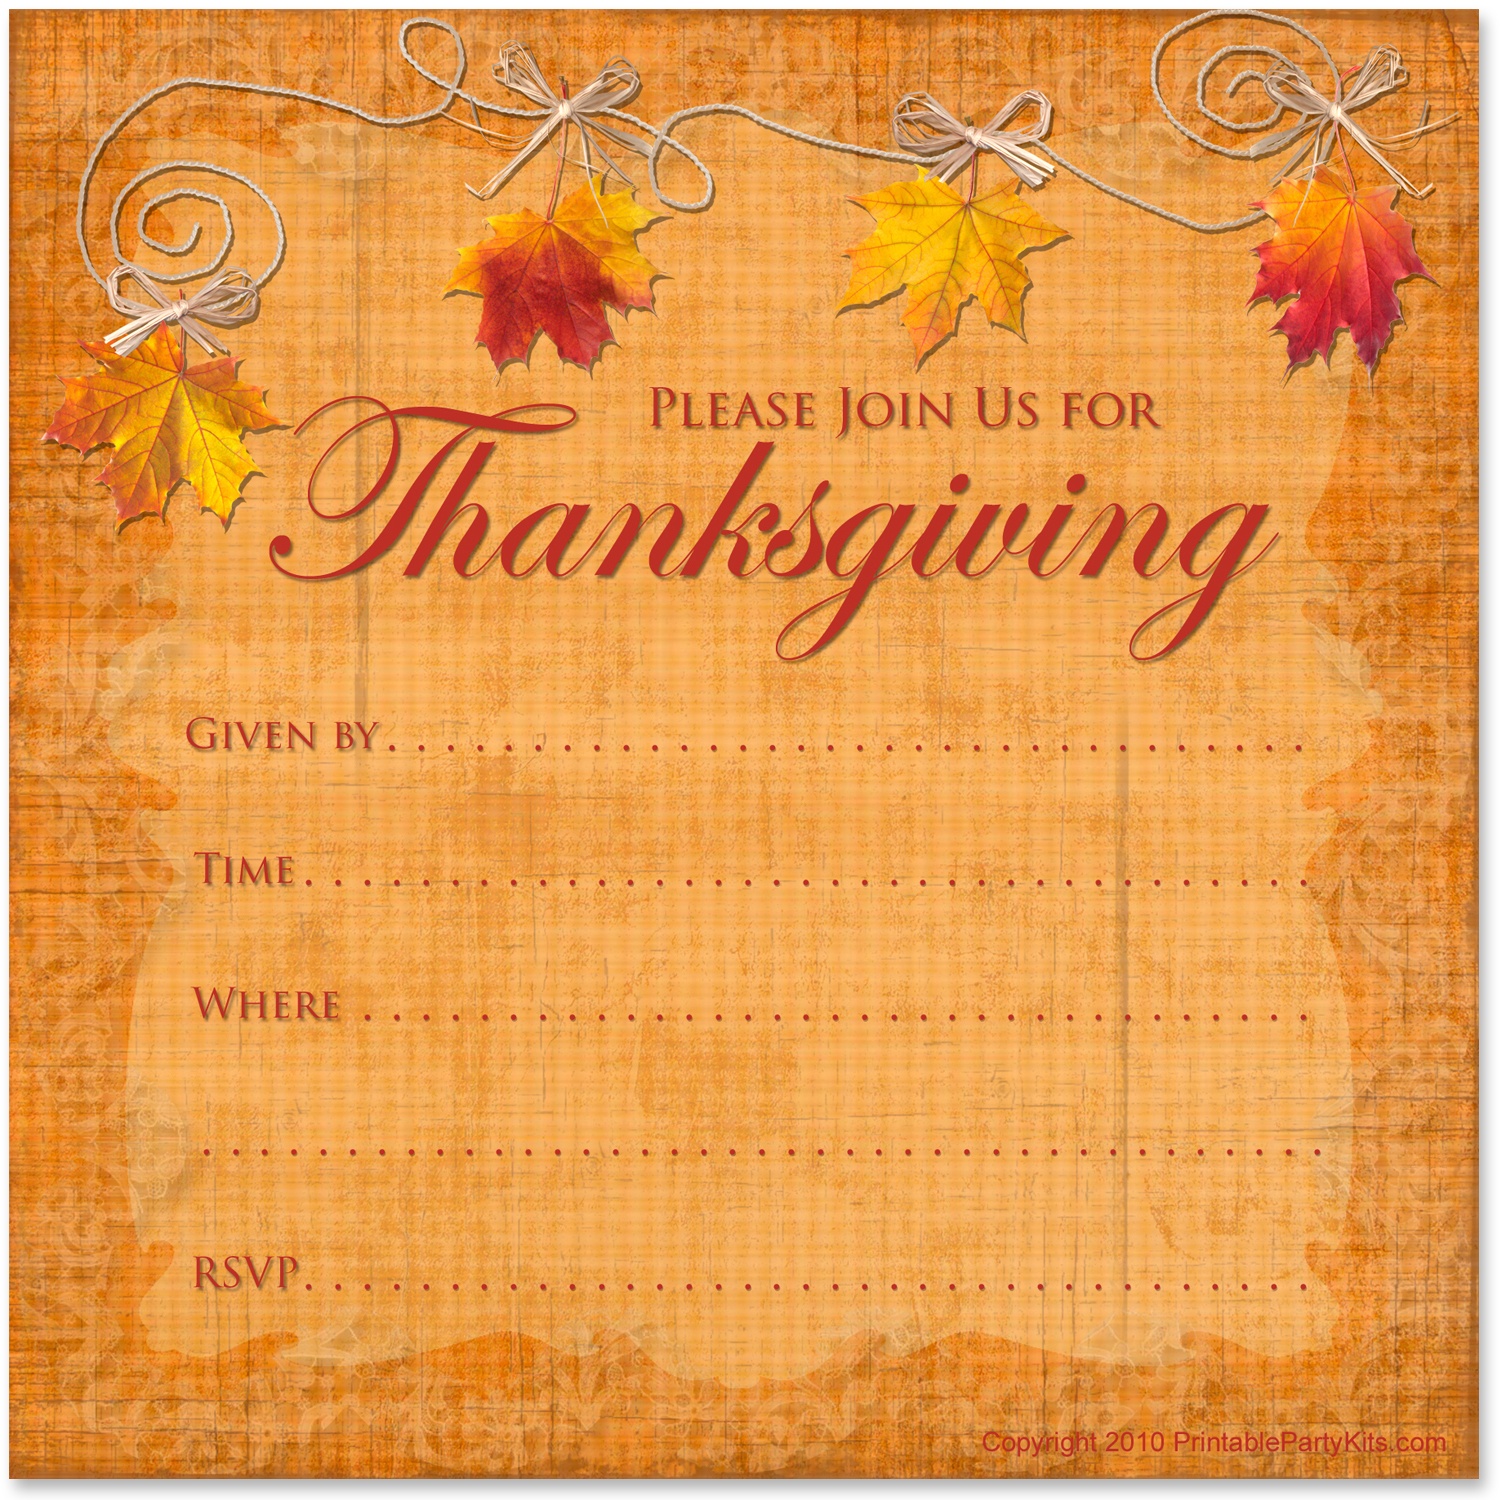 Can&amp;#039;t Find Substitution For Tag [Post.body]--&amp;gt; Printable - Free Printable Thanksgiving Invitation Templates